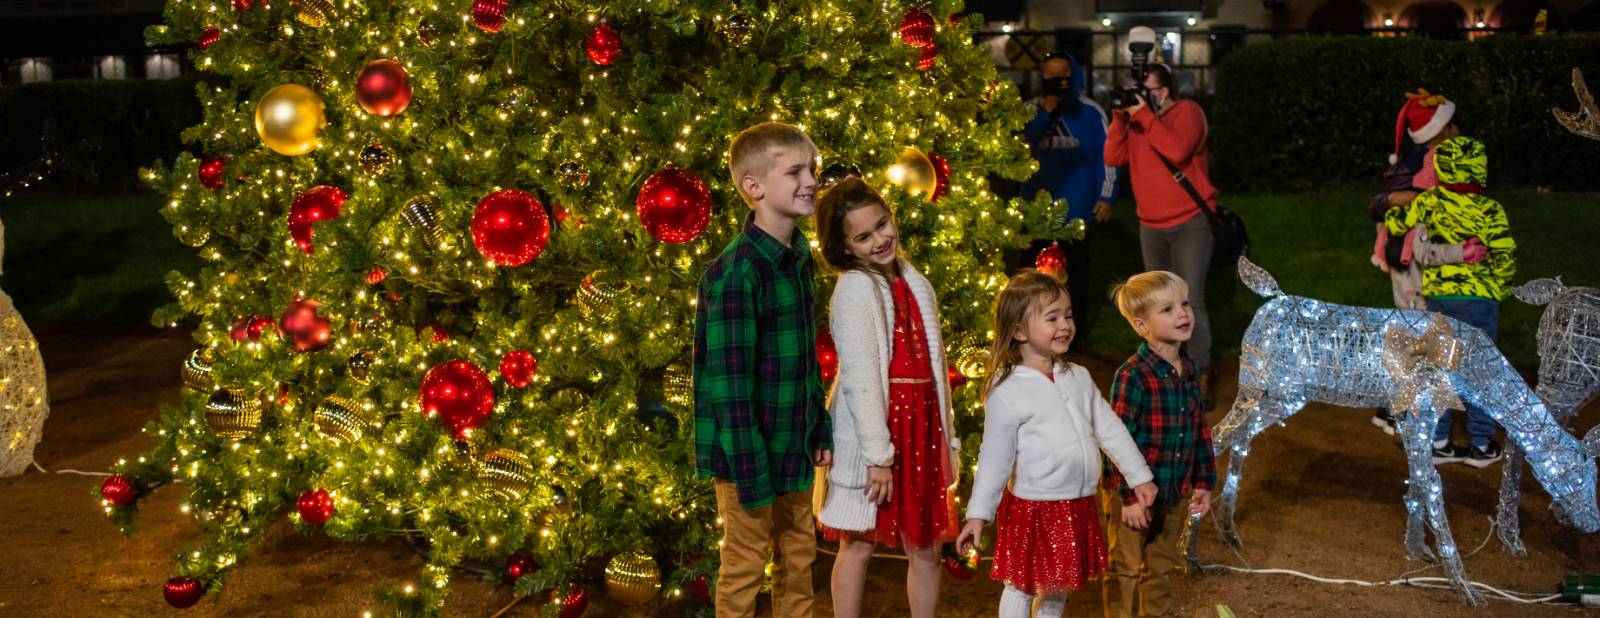 Kids in front of Christmas Tree